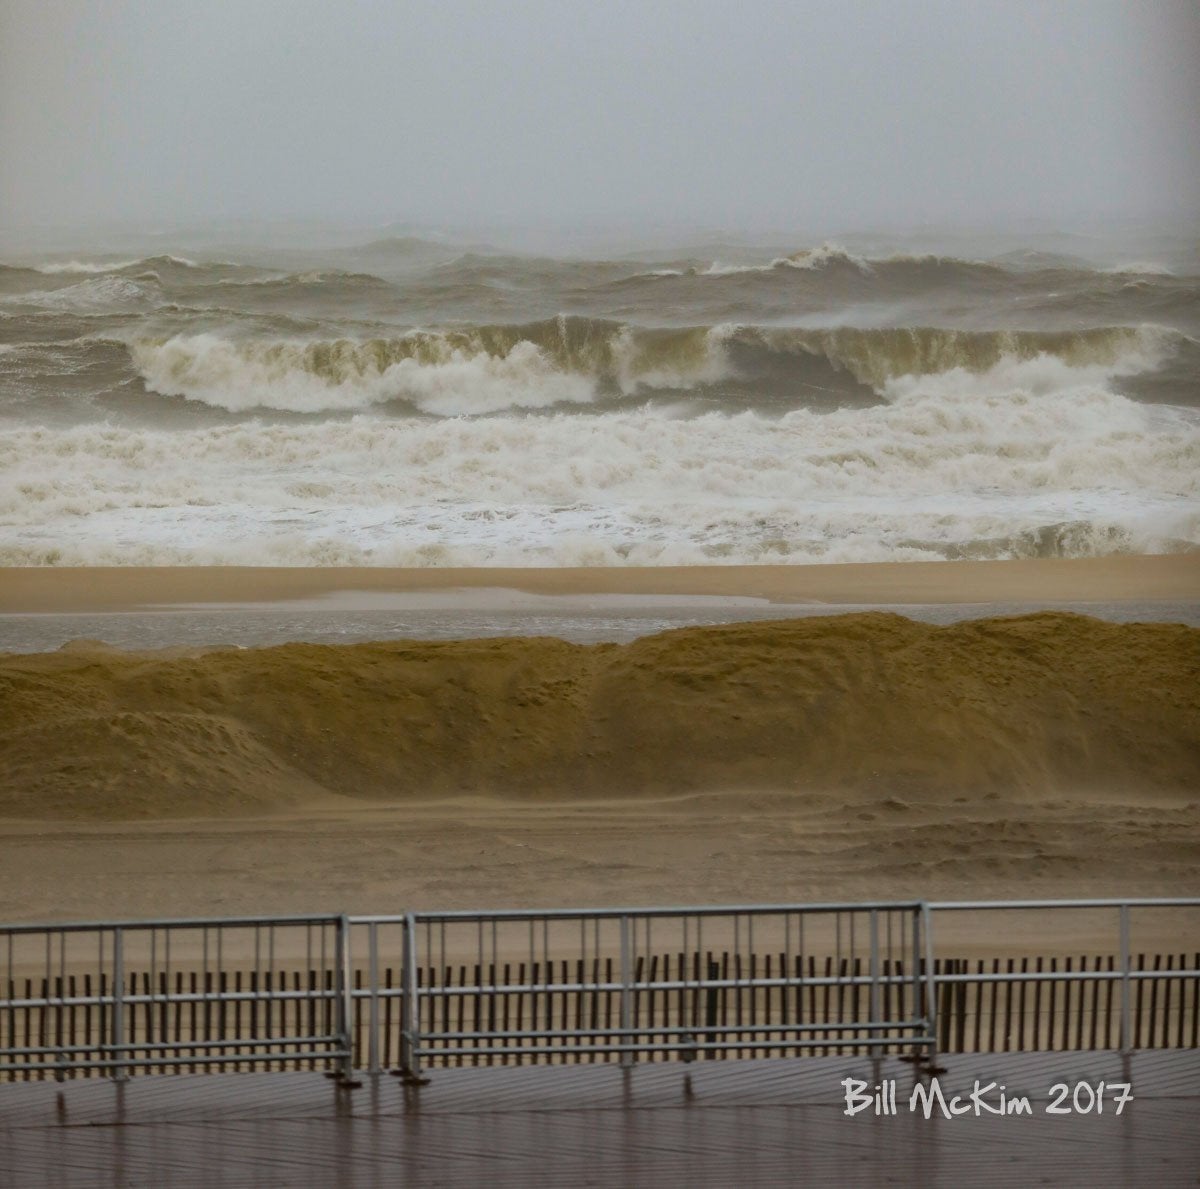 Noreaster pounds the beaches in New Jersey